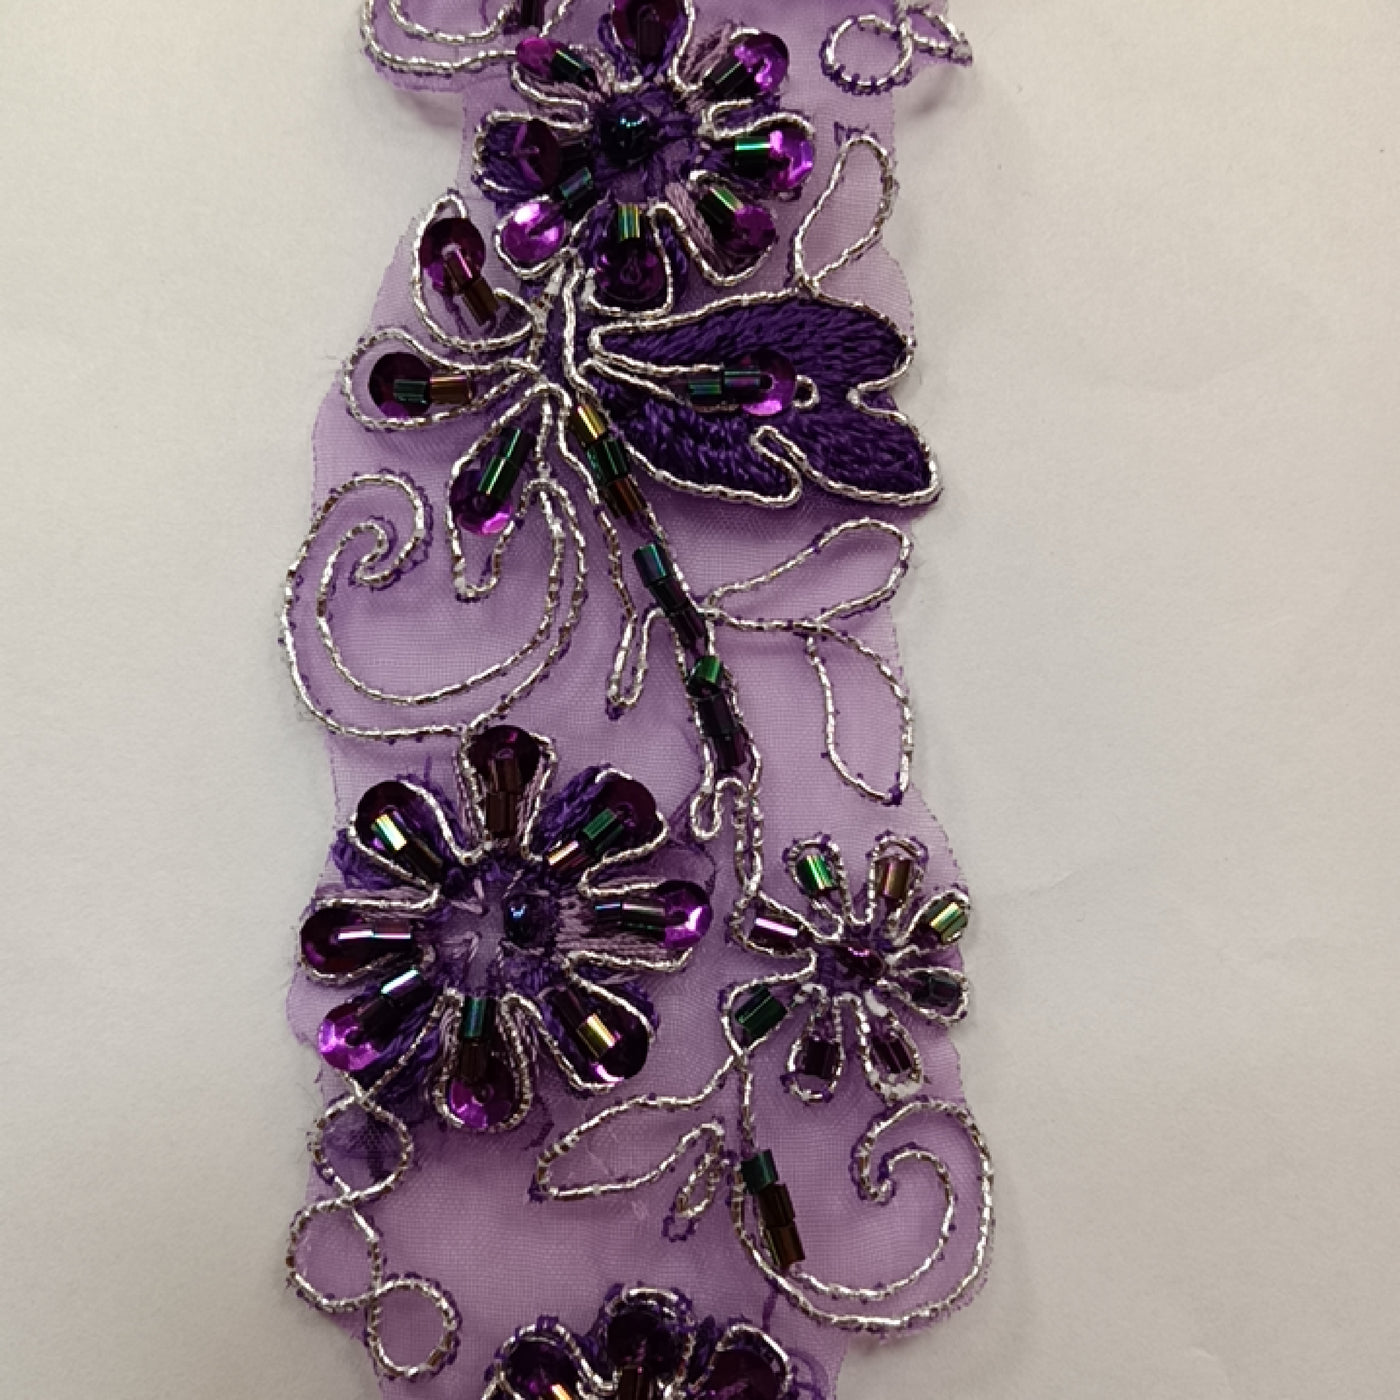 Beaded, Corded & Embroidered on Organza Purple with Silver Trimming. Lace Usa